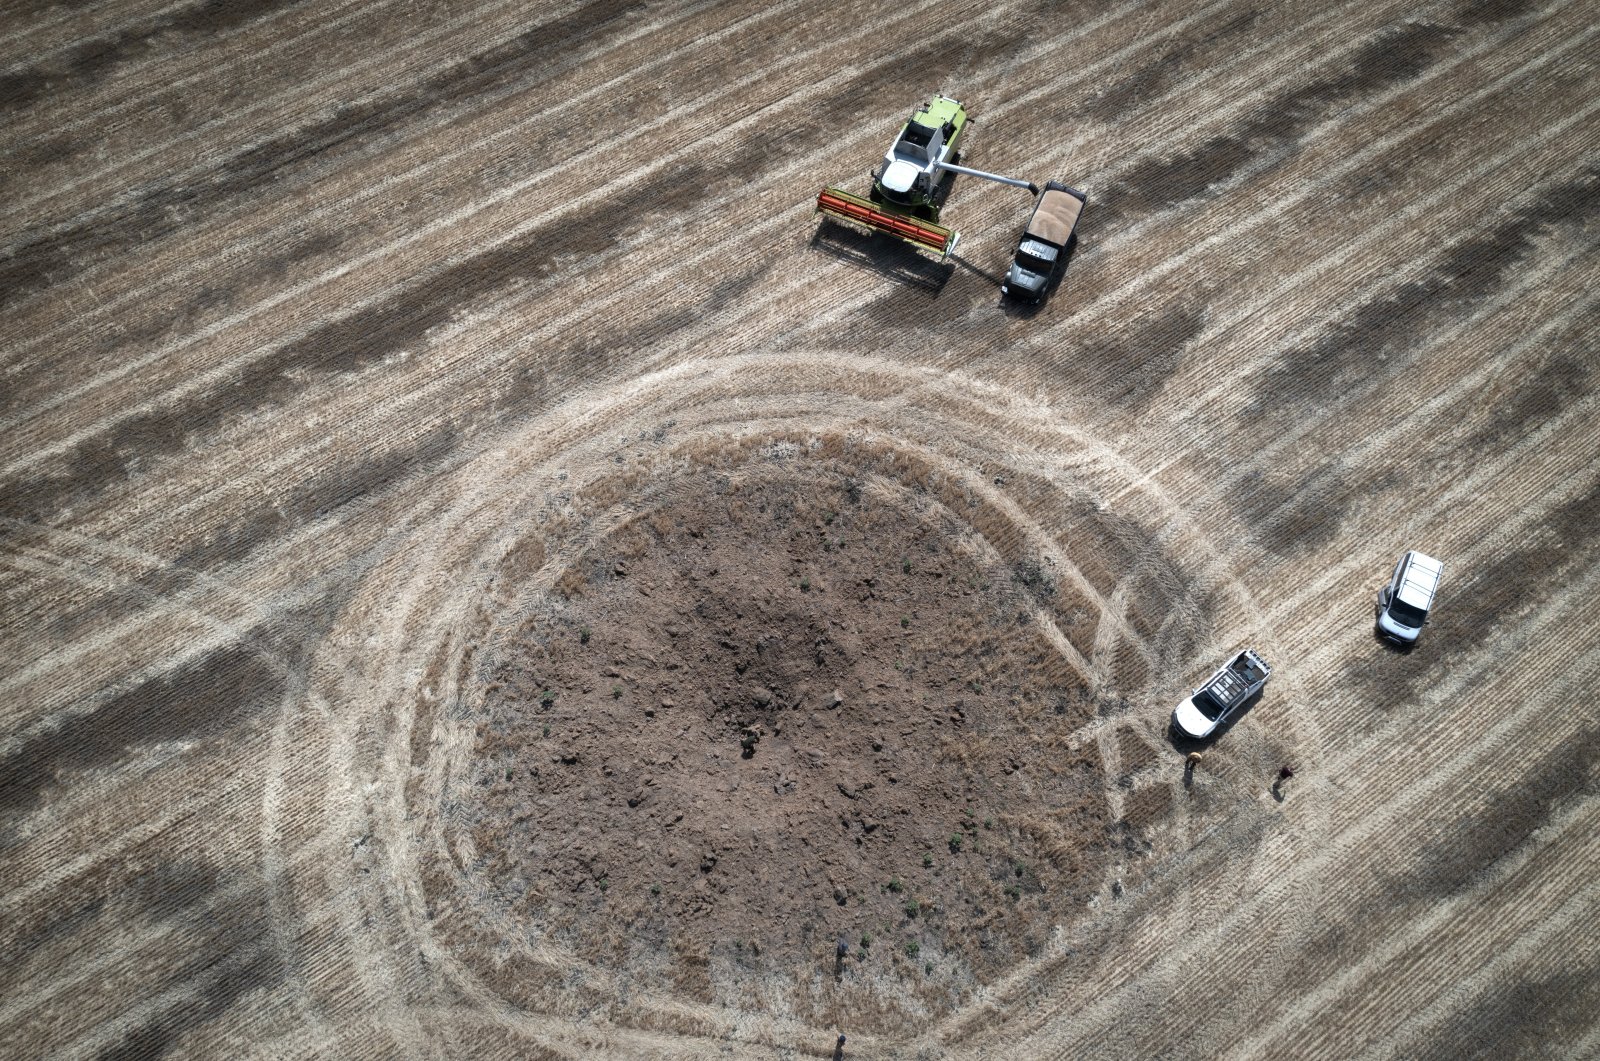 A farmer collects harvest in a field ten kilometers from the front line, around a crater left by a Russian rocket in the foreground, in the Dnipropetrovsk region, Ukraine, on July 4, 2022. (AP File Photo)